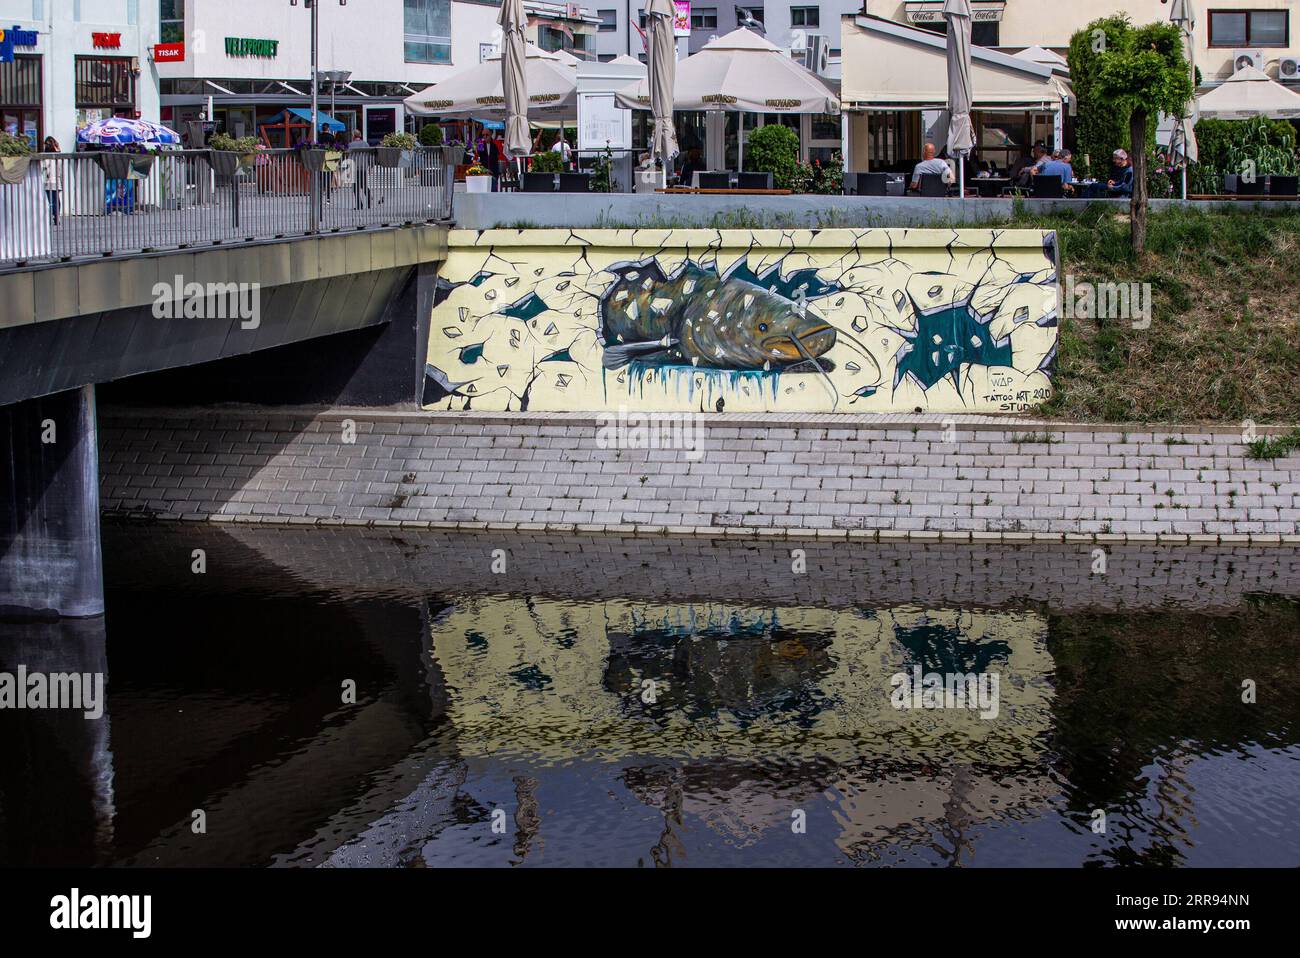 210528 -- VUKOVAR, May 28, 2021 -- A mural is seen on the river bank in Vukovar, Croatia, May 27, 2021. Street art festival VukovART, which features murals created by world-famous artists on the walls and sidewalks, is held in Vukovar for the fifth year in a row. /Pixsell via Xinhua CROATIA-VUKOVAR-STREET ART-MURALS DavorxJavorovic PUBLICATIONxNOTxINxCHN Stock Photo